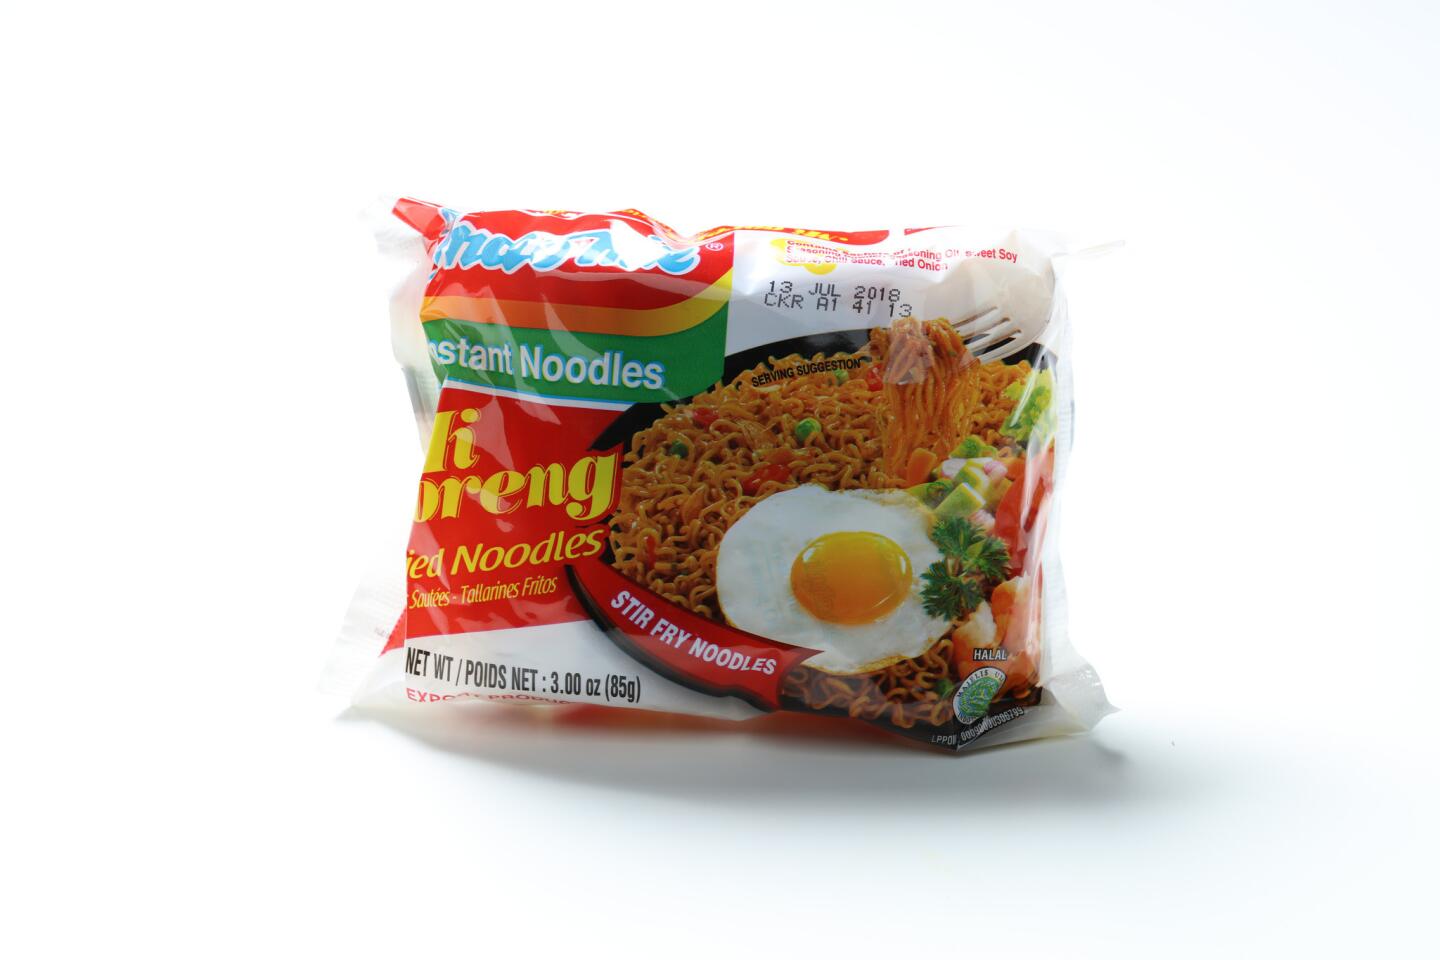 Indomie Mi Goreng from Indonesia, a take on the street food fried noodles.